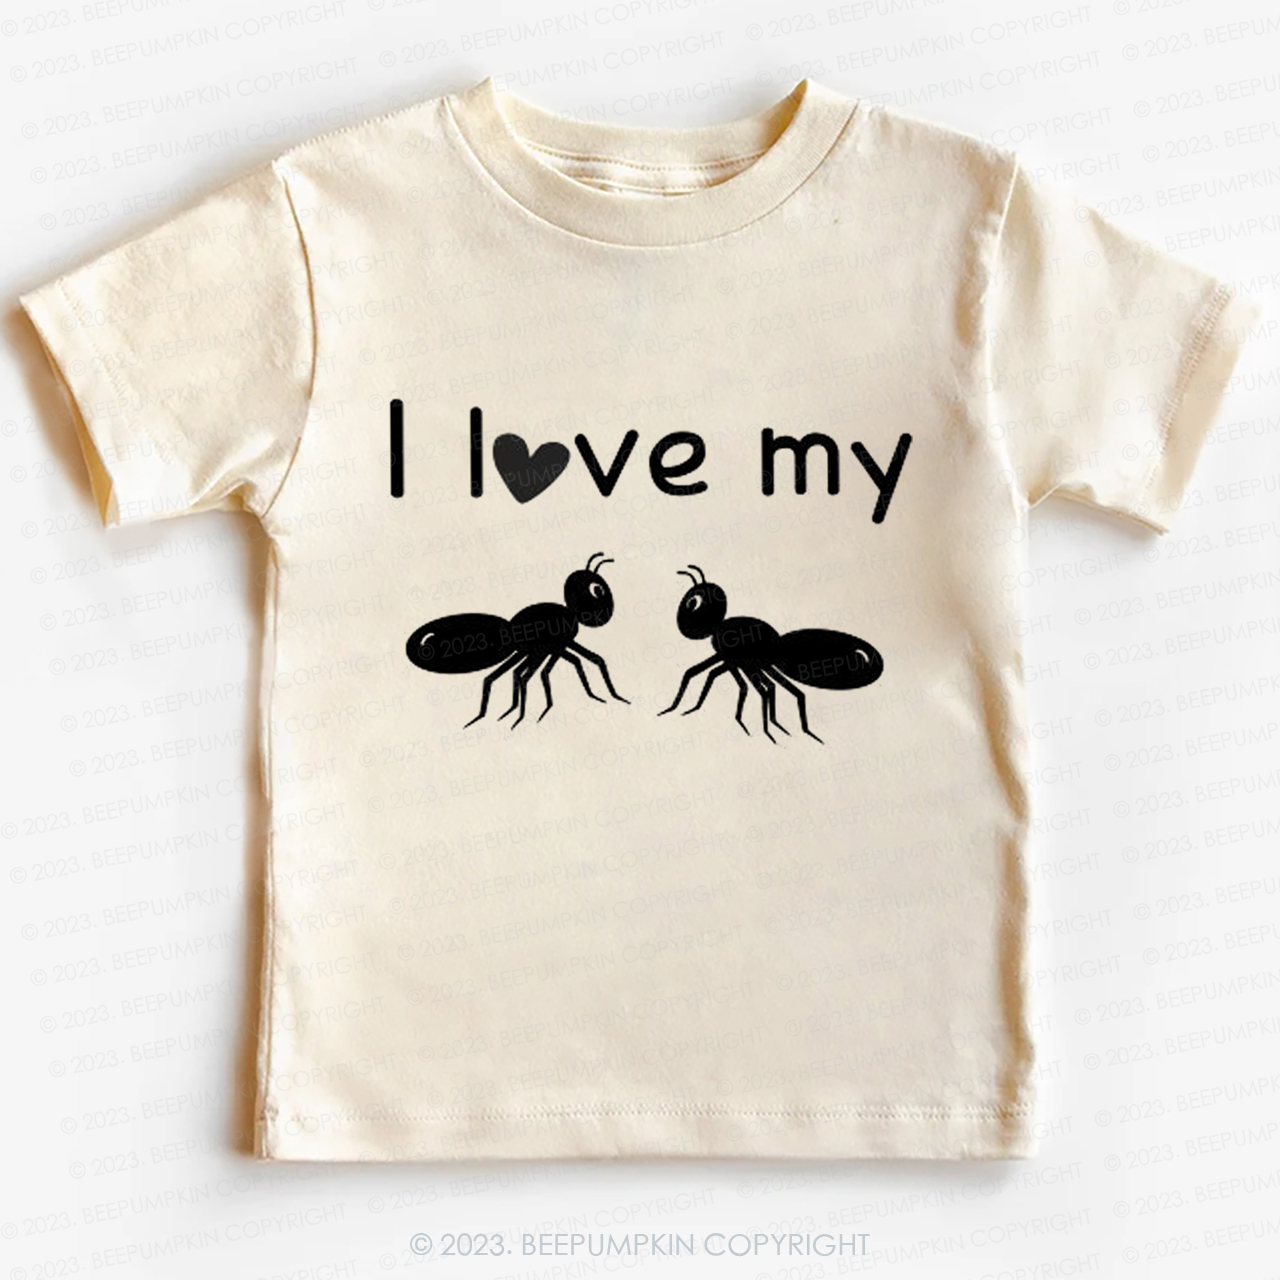 I Love My Aunts -Toddler Tees